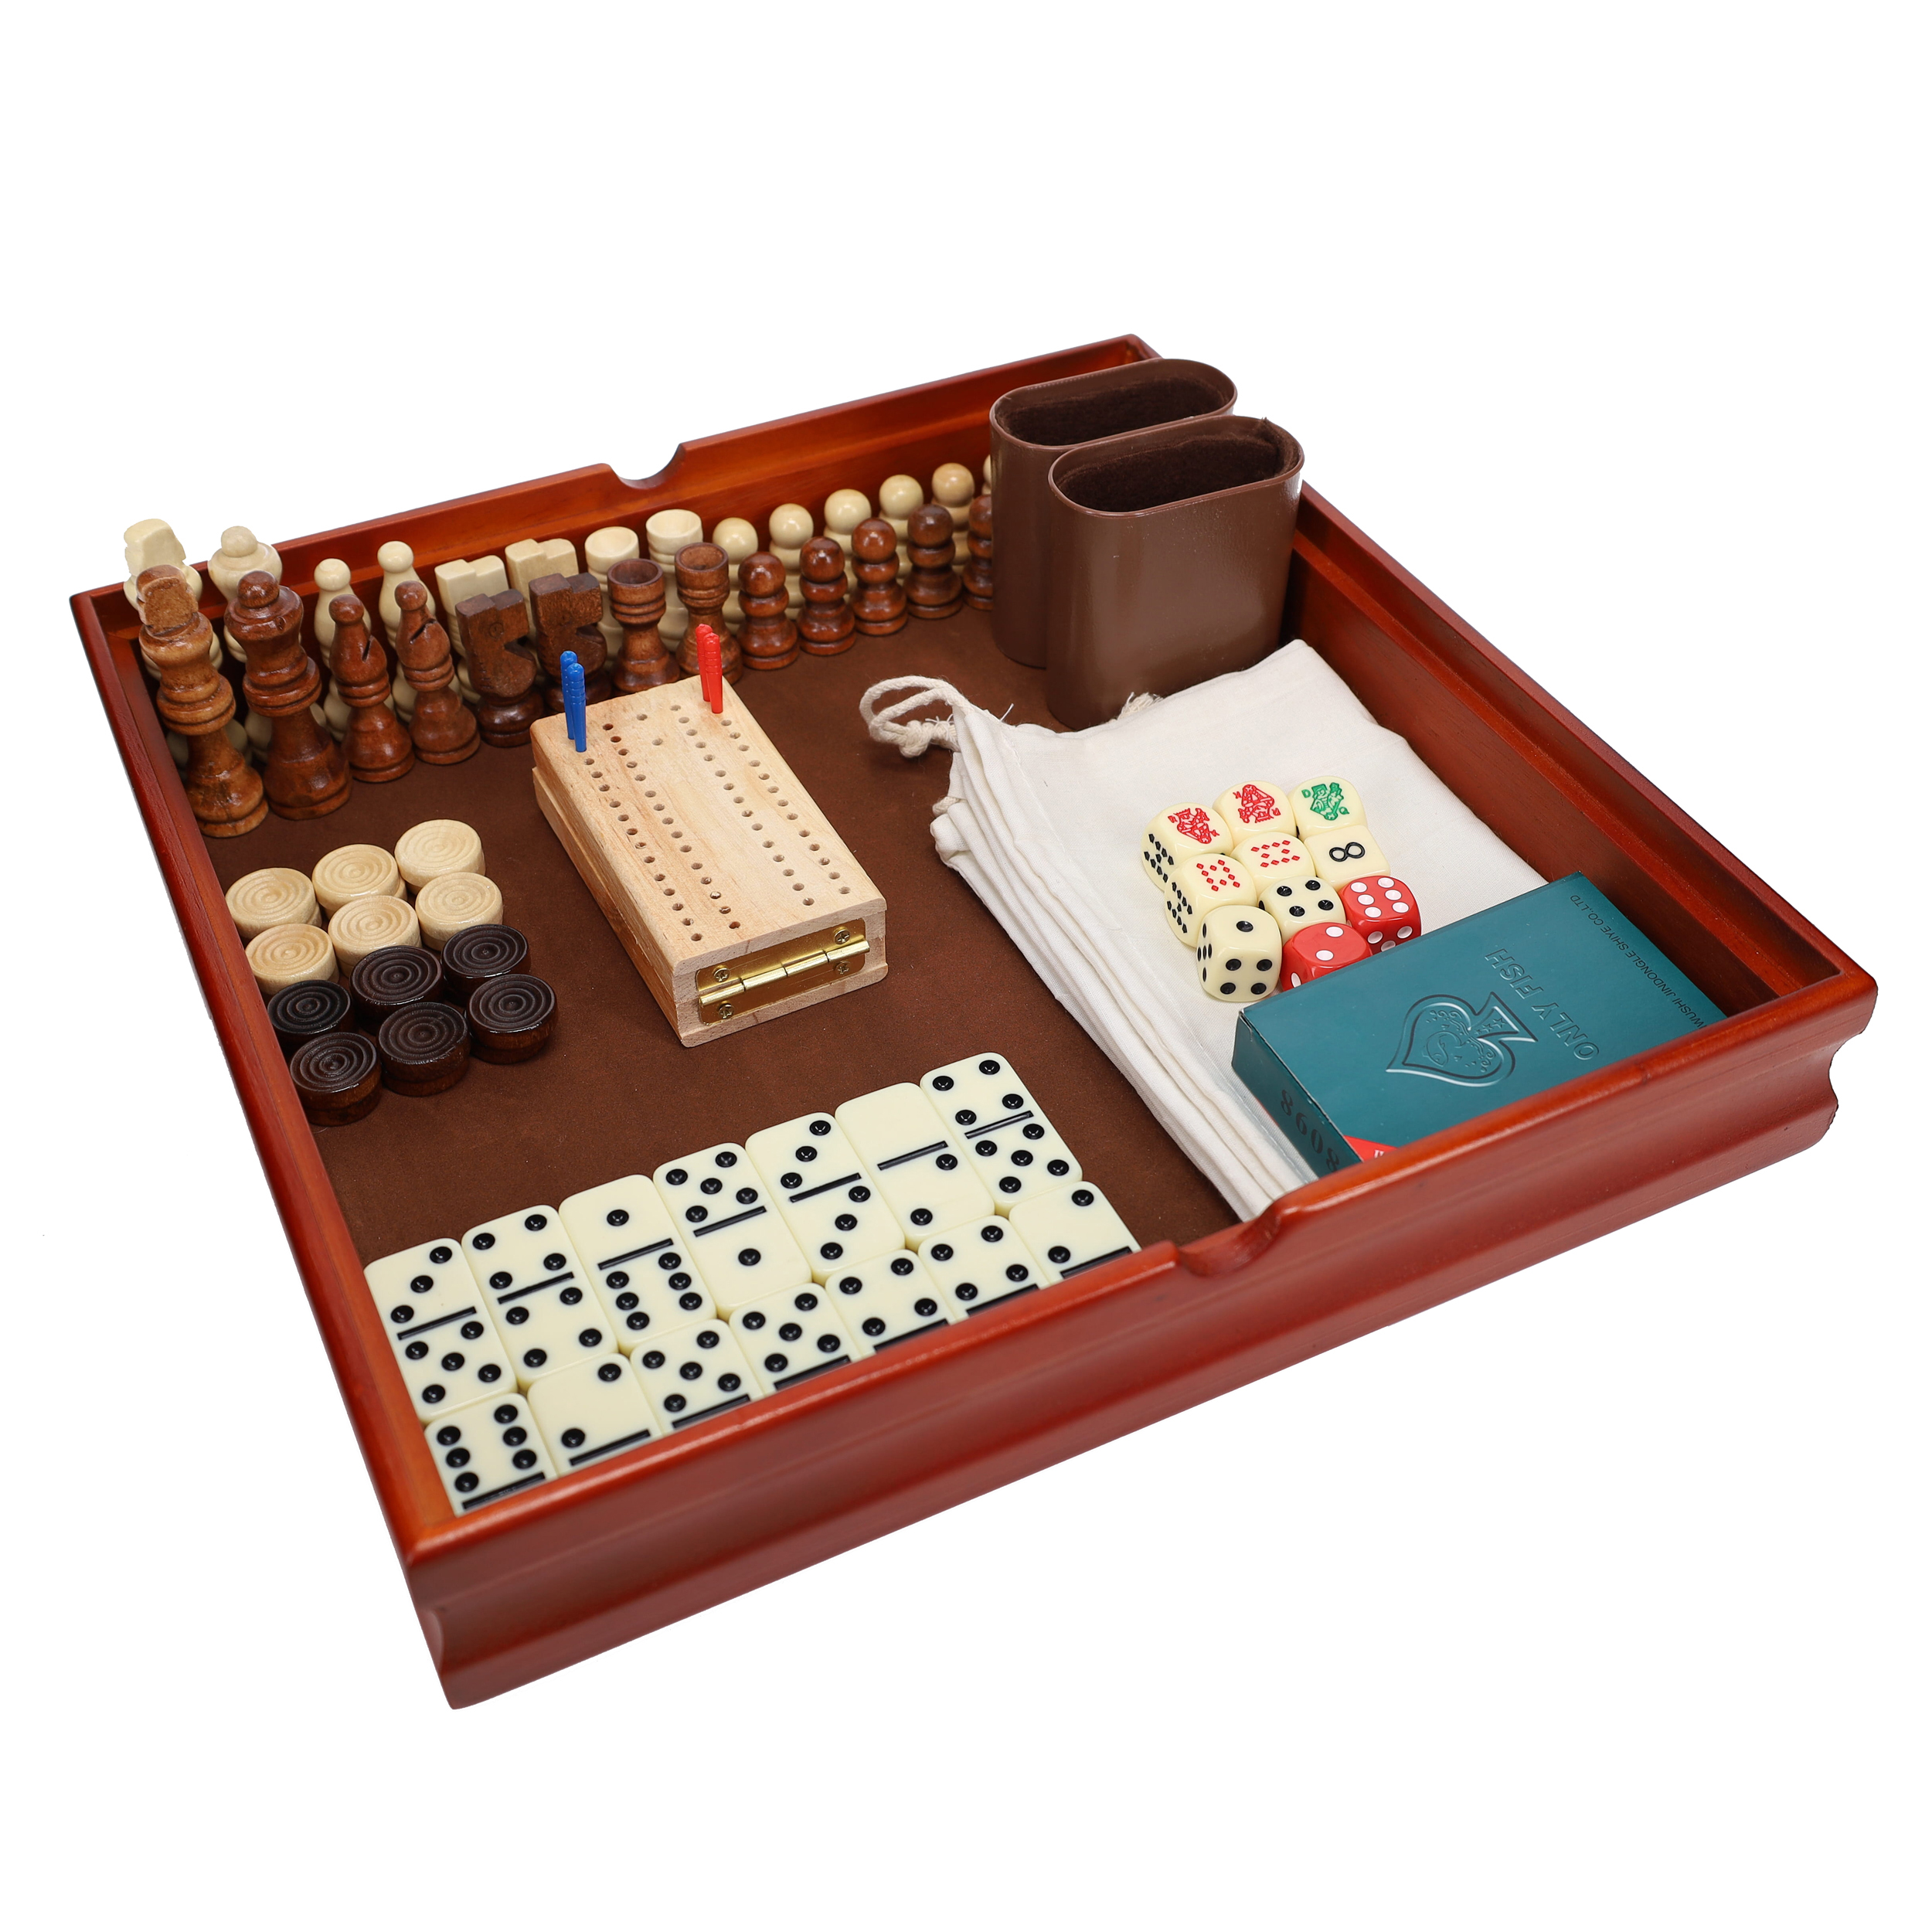 GSE Wooden 7-in-1 Board Game Set - Chess, Checkers, Backgammon, Dominoes,  Cribbage Board, Playing Card & Poker Dice Game Combo Set (Old Fashioned)